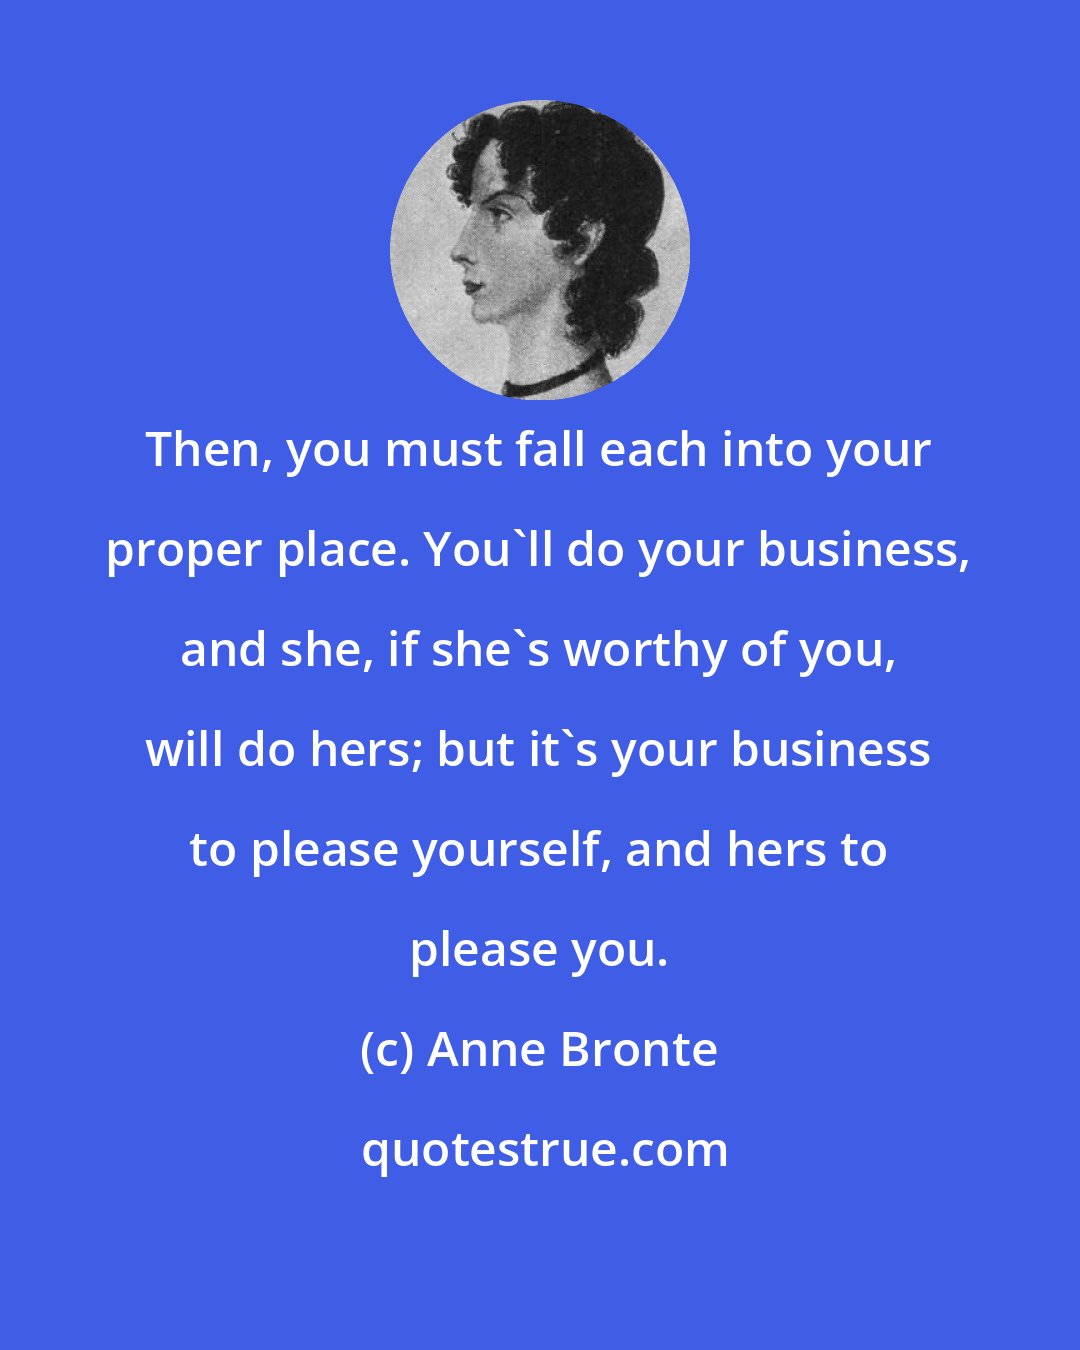 Anne Bronte: Then, you must fall each into your proper place. You'll do your business, and she, if she's worthy of you, will do hers; but it's your business to please yourself, and hers to please you.